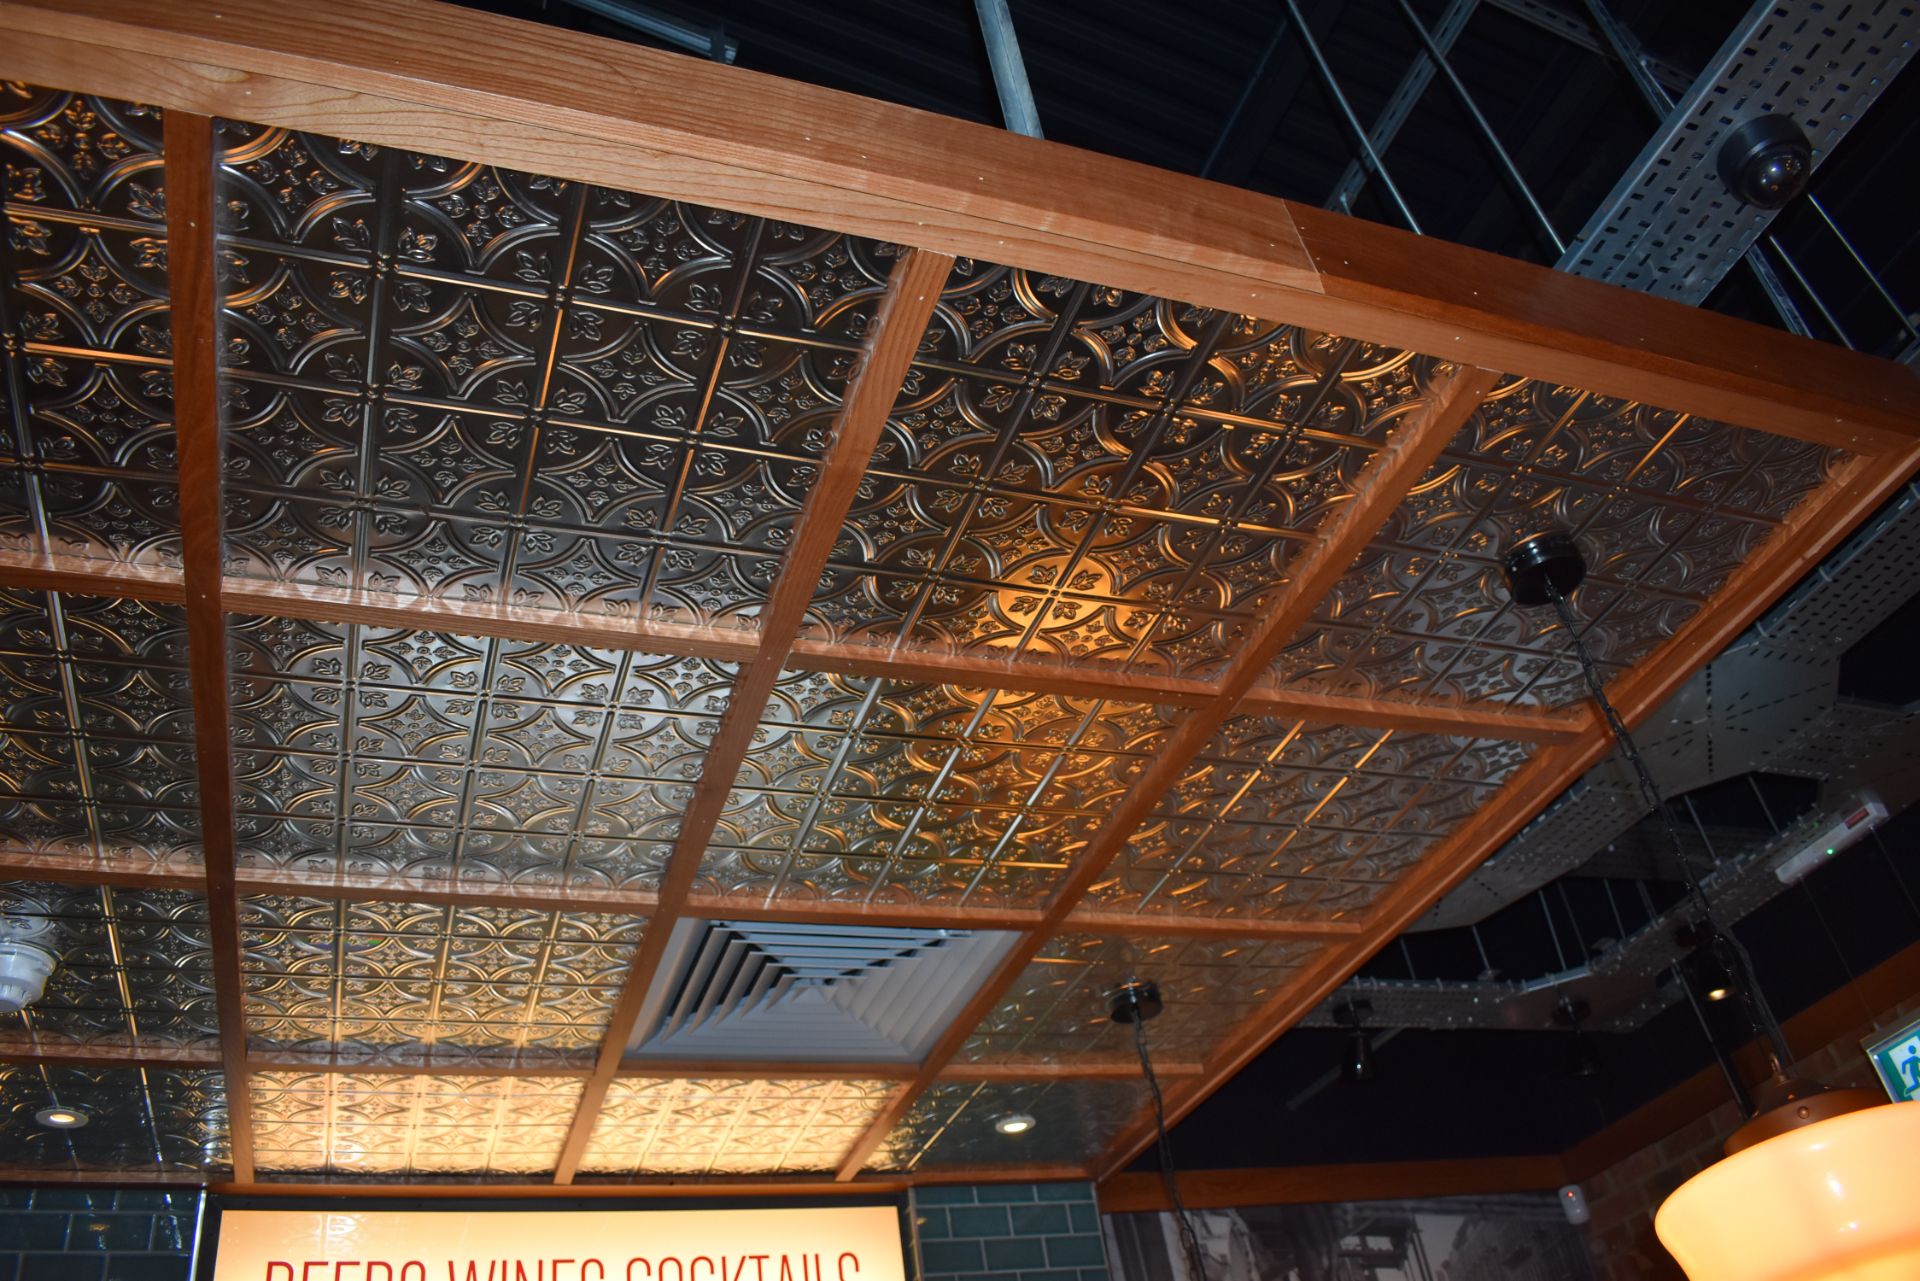 1 x Suspended Decorative Ceiling Feature With a Light Wood Frame and Ornate Tin Insert Panels - L470 - Image 11 of 12